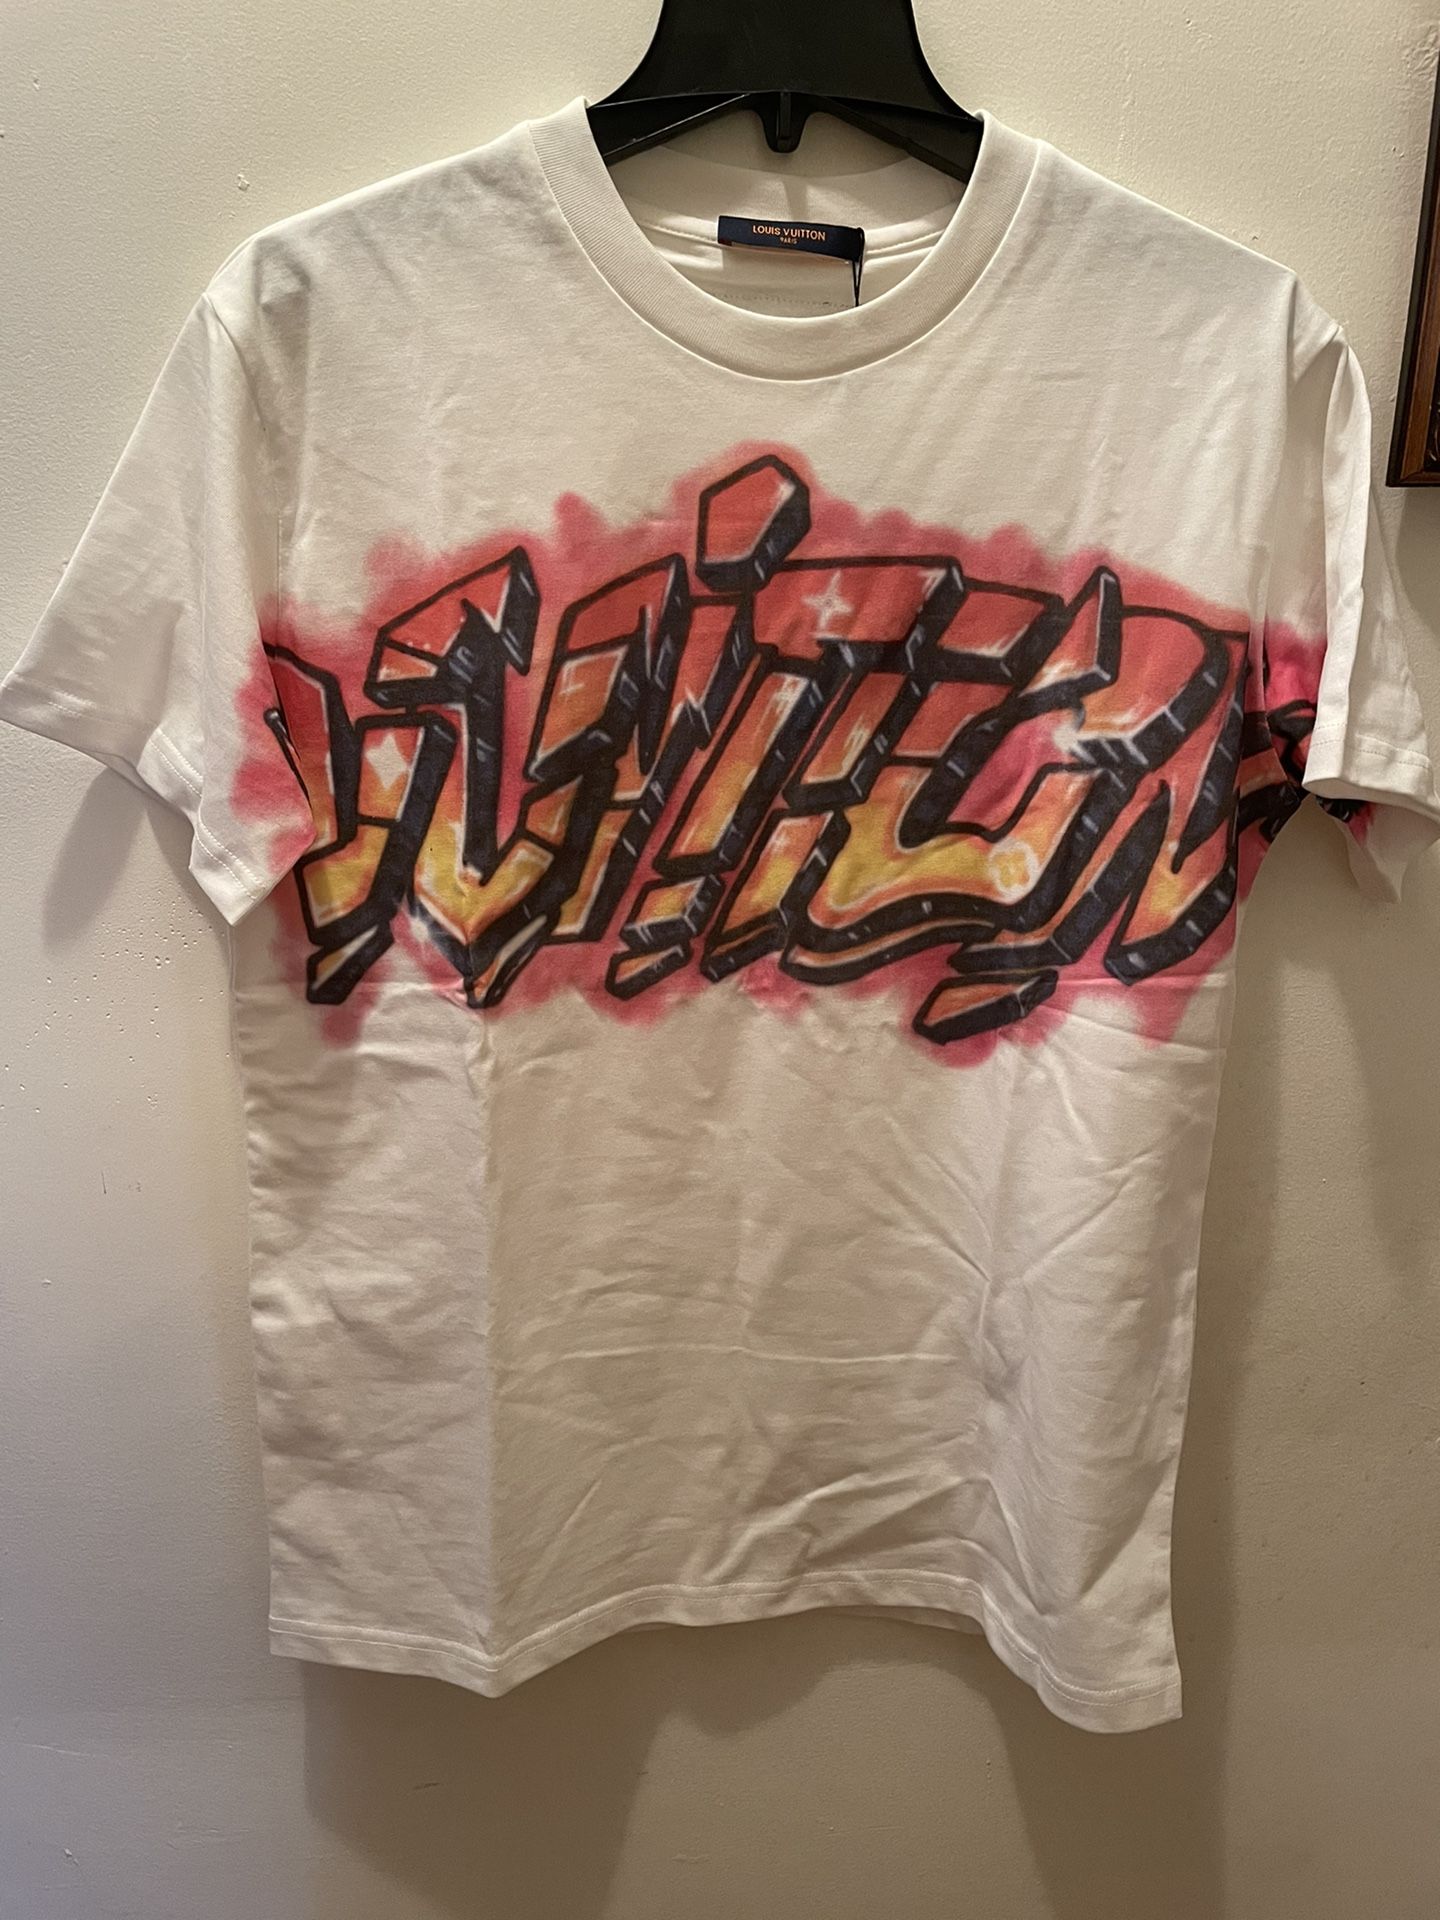 Louis Vuitton Duck Tee Shirt for Sale in Brooklyn, NY - OfferUp